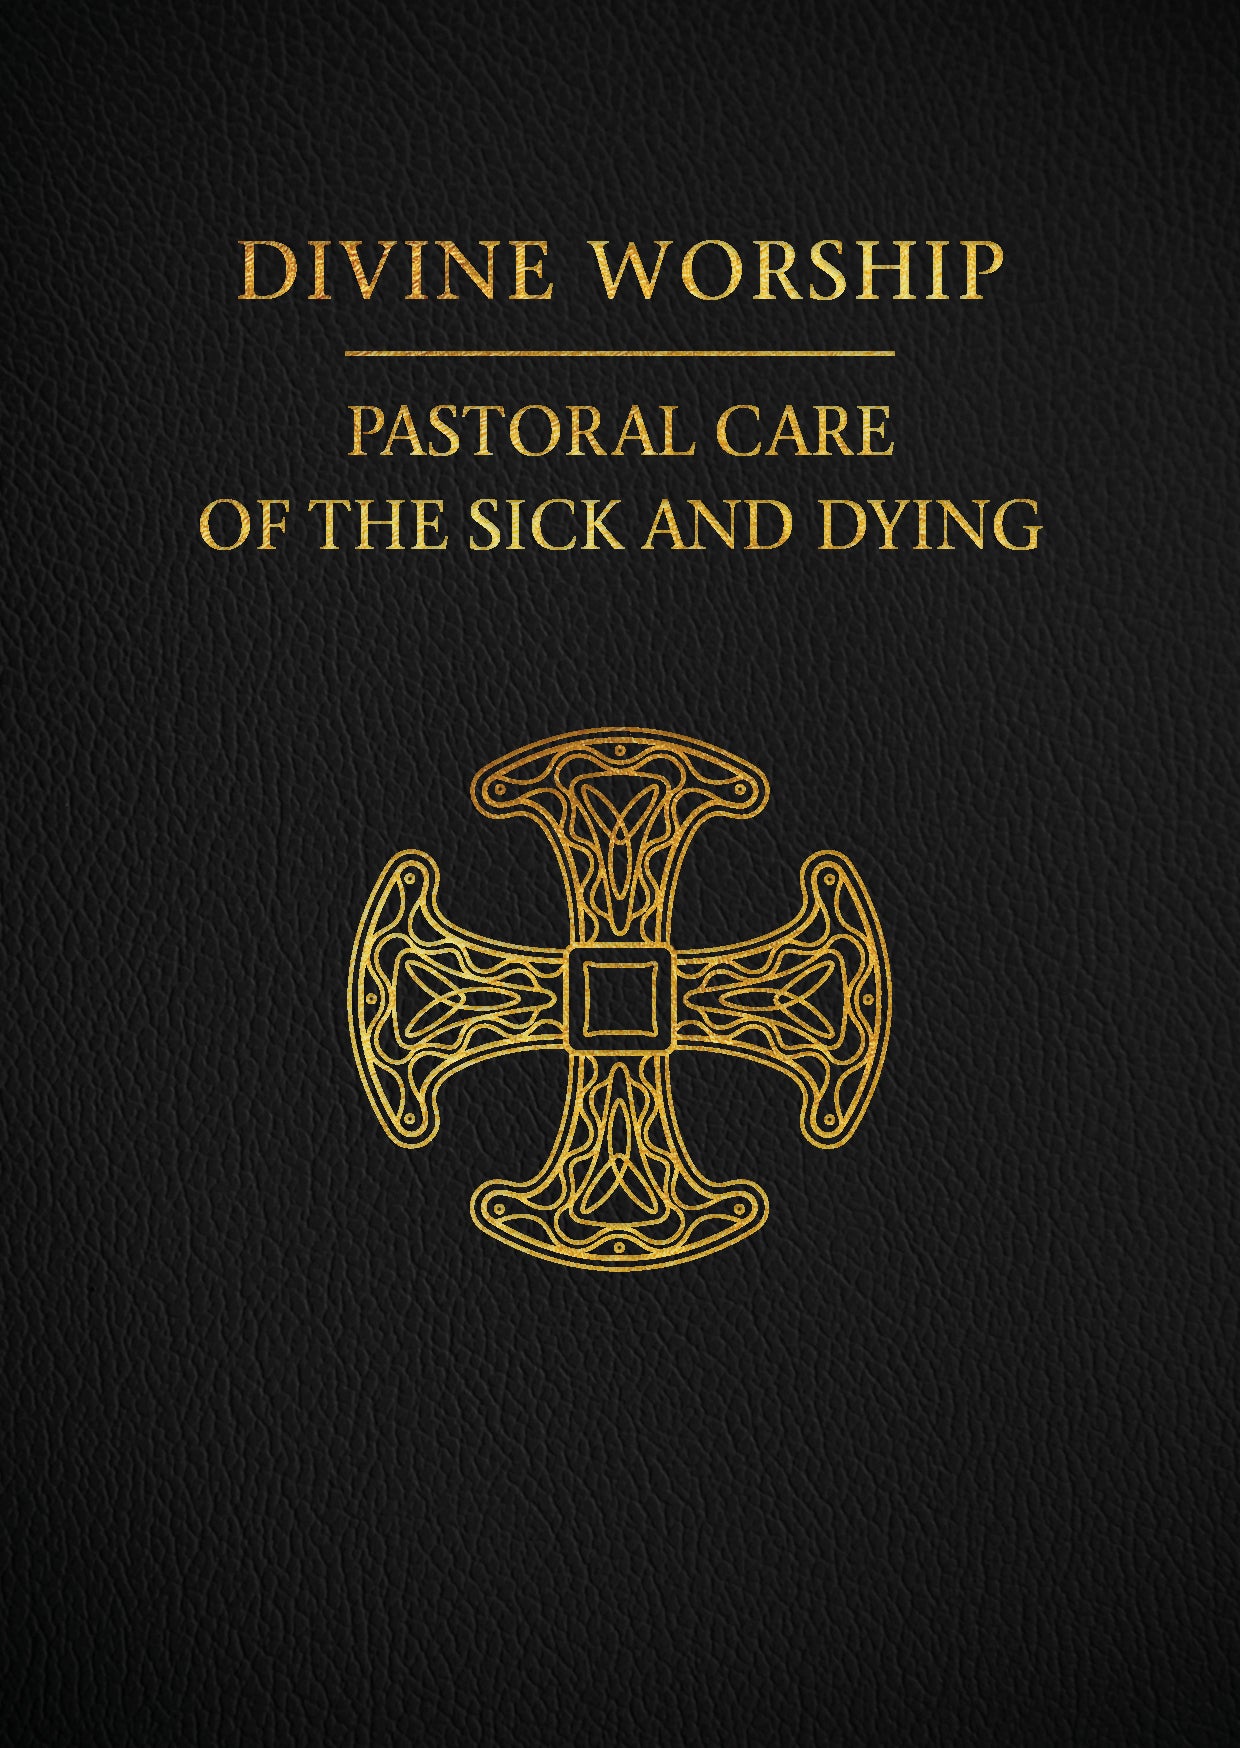 Image of Divine Worship: Pastoral Care of the Sick and Dying other